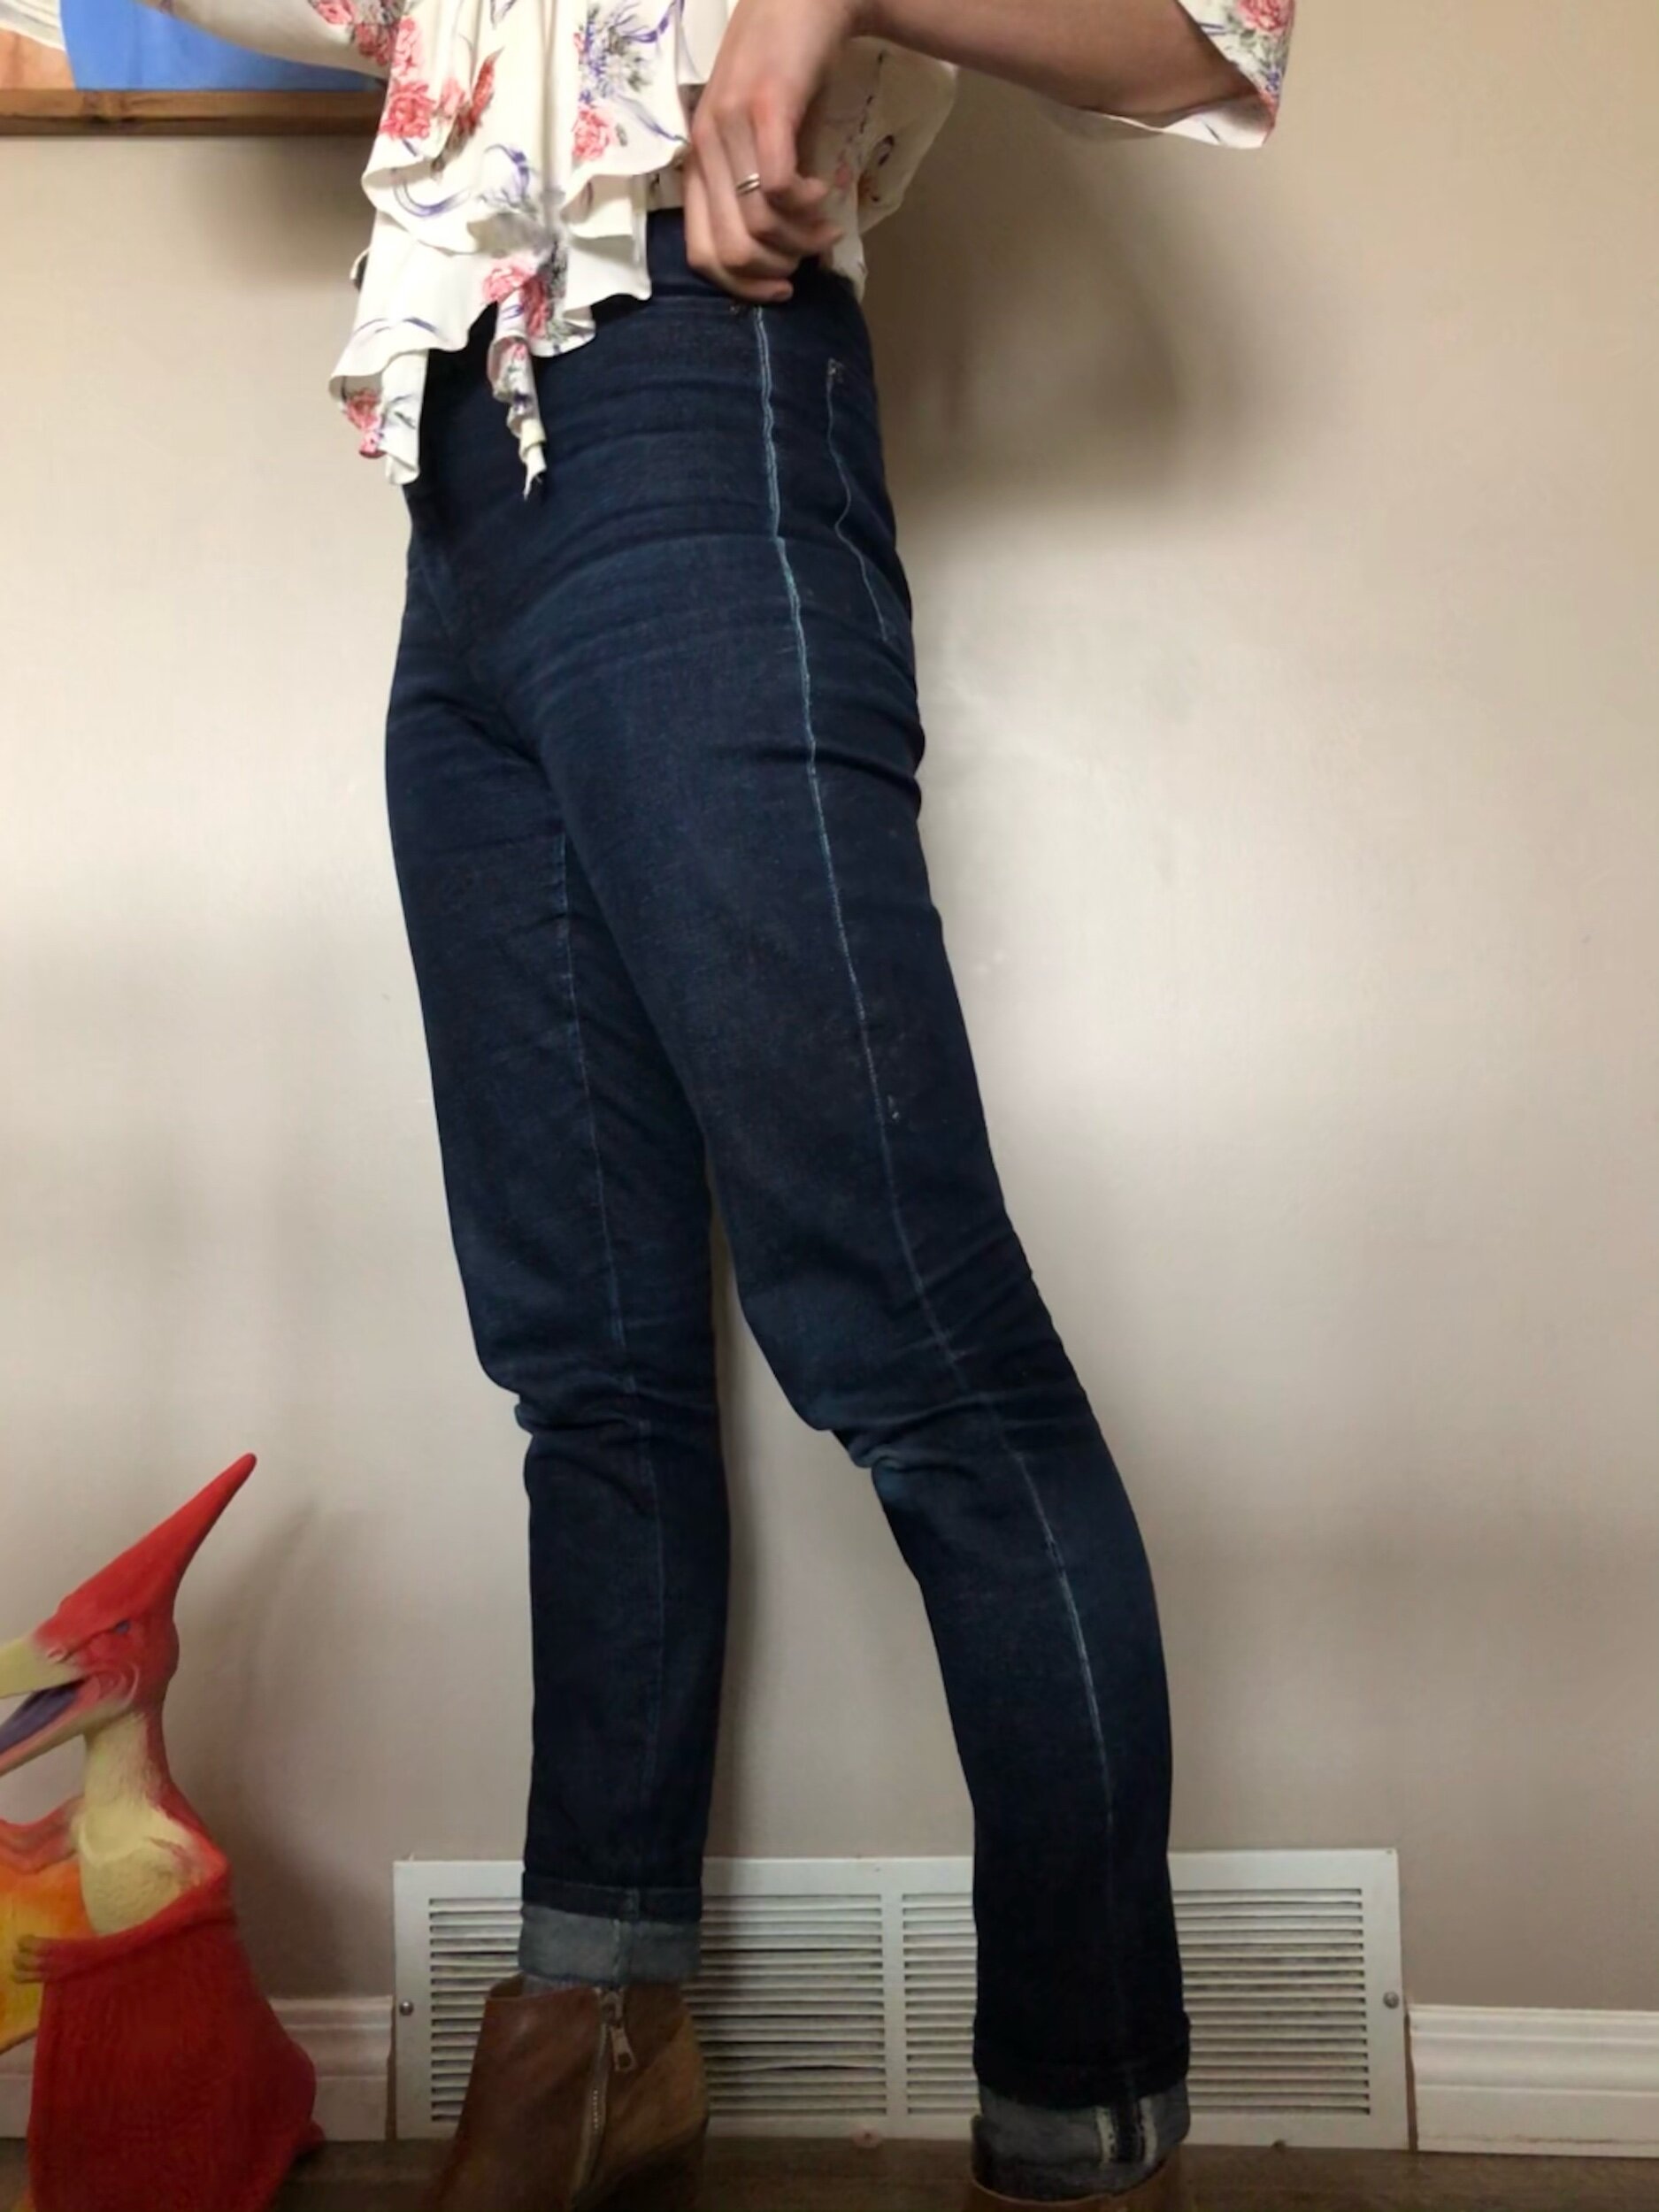 philipa pants in popcorn denim in side view - seam visible due to aging